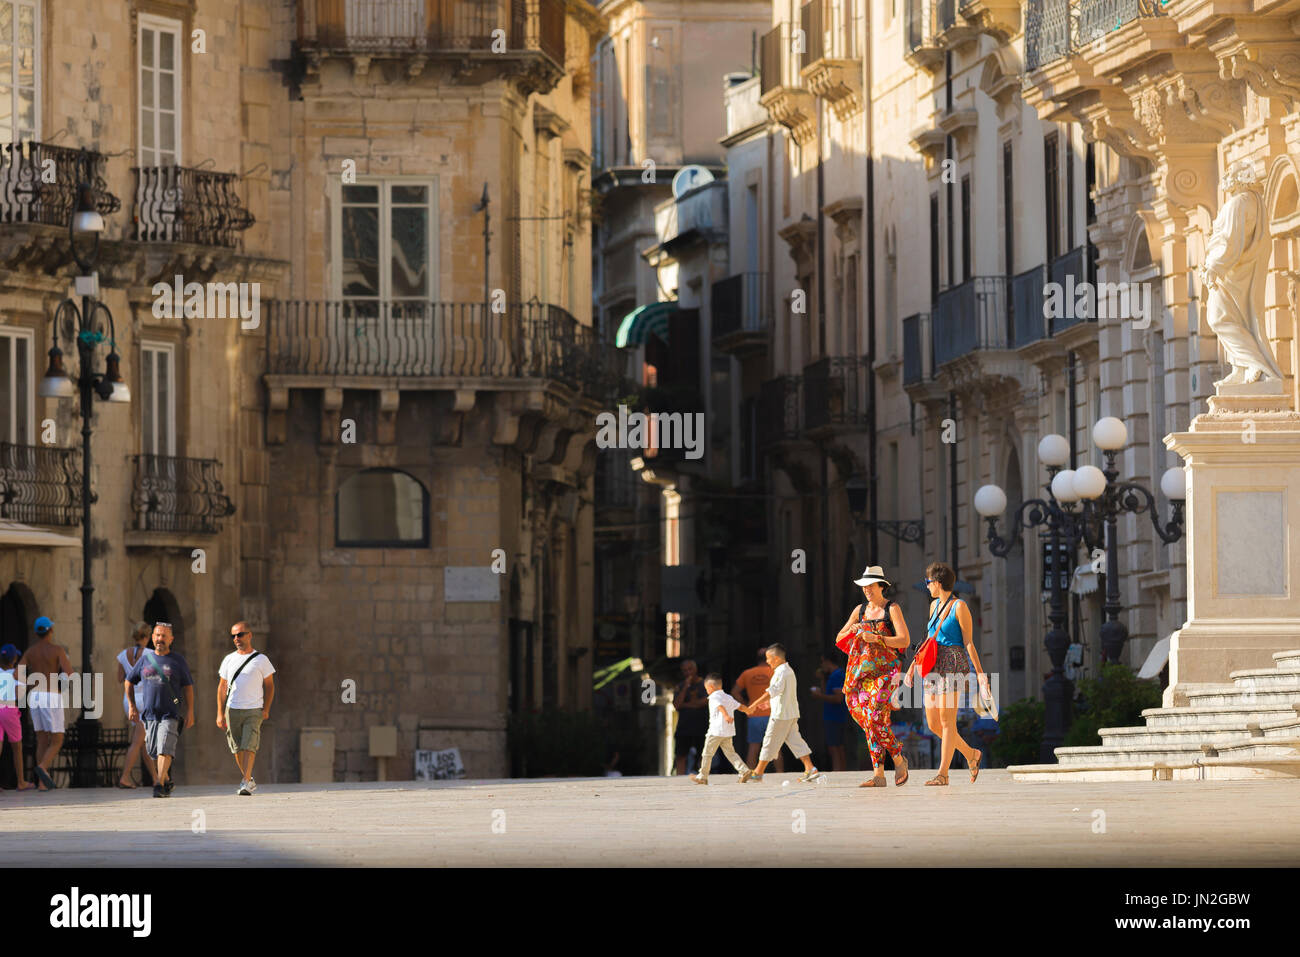 Women friends travel, view of two women tourists walking through the historic Piazza del Duomo in Ortigia, Syracuse (Siracusa), Sicily, Italy Stock Photo